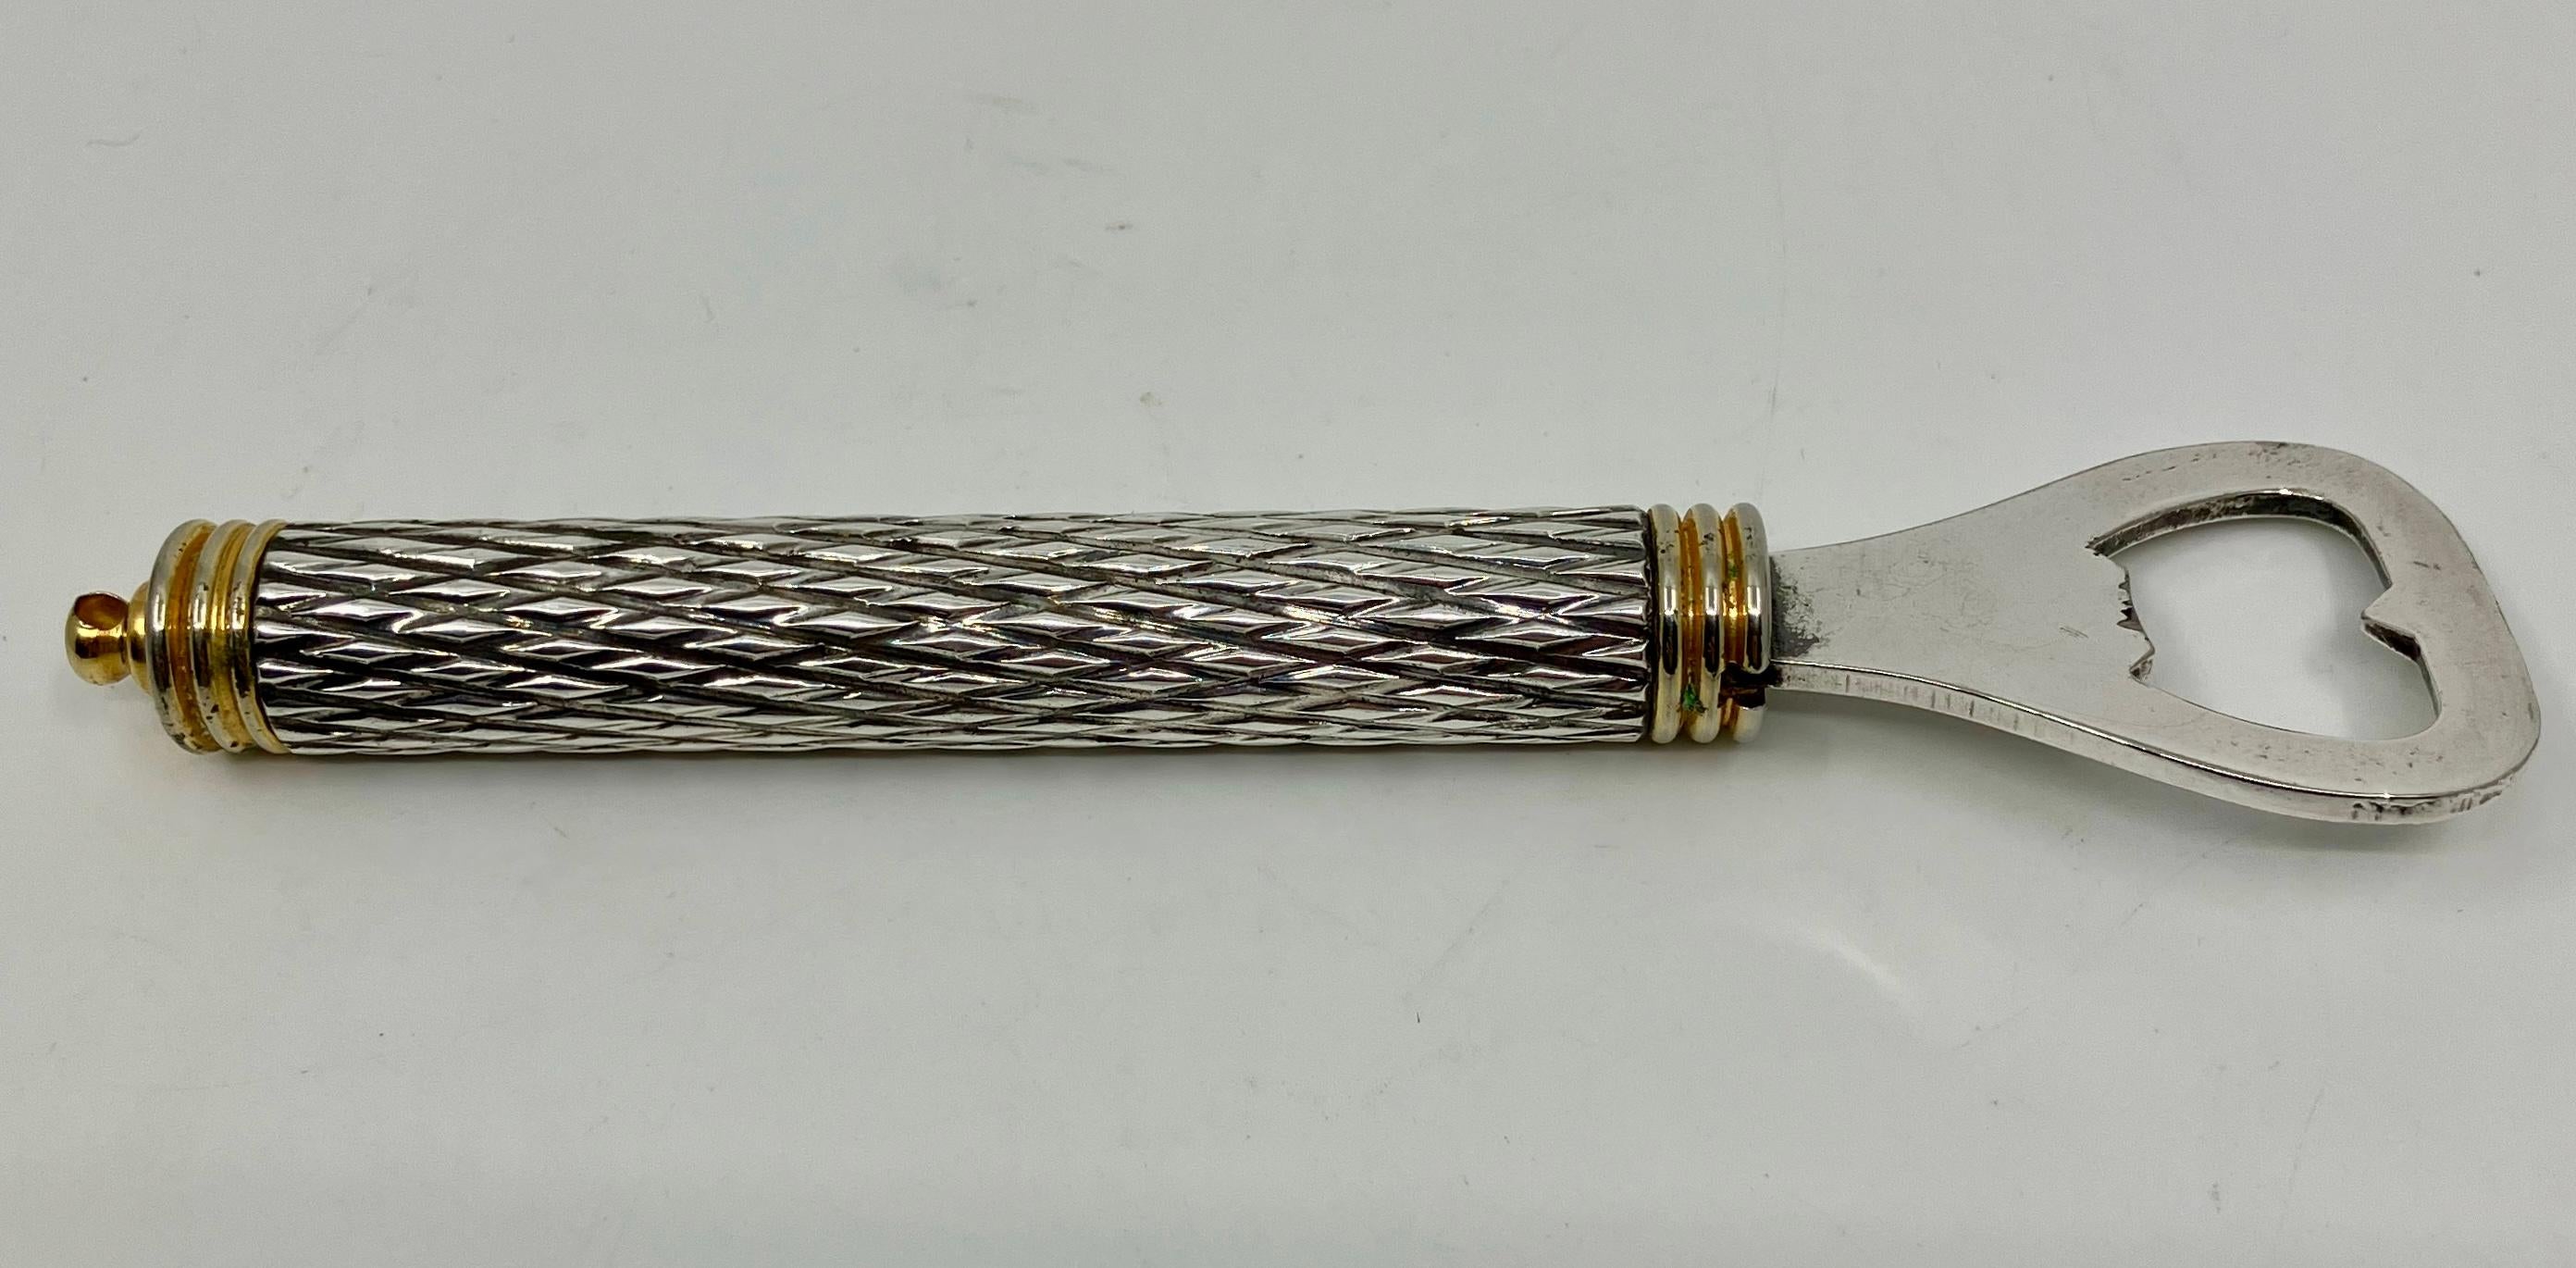 French silver bottle opener. Silvered and gold metal bottle opener with harlequin diapered engine turned cylinder. France 1930’s

Dimensions: 6.38